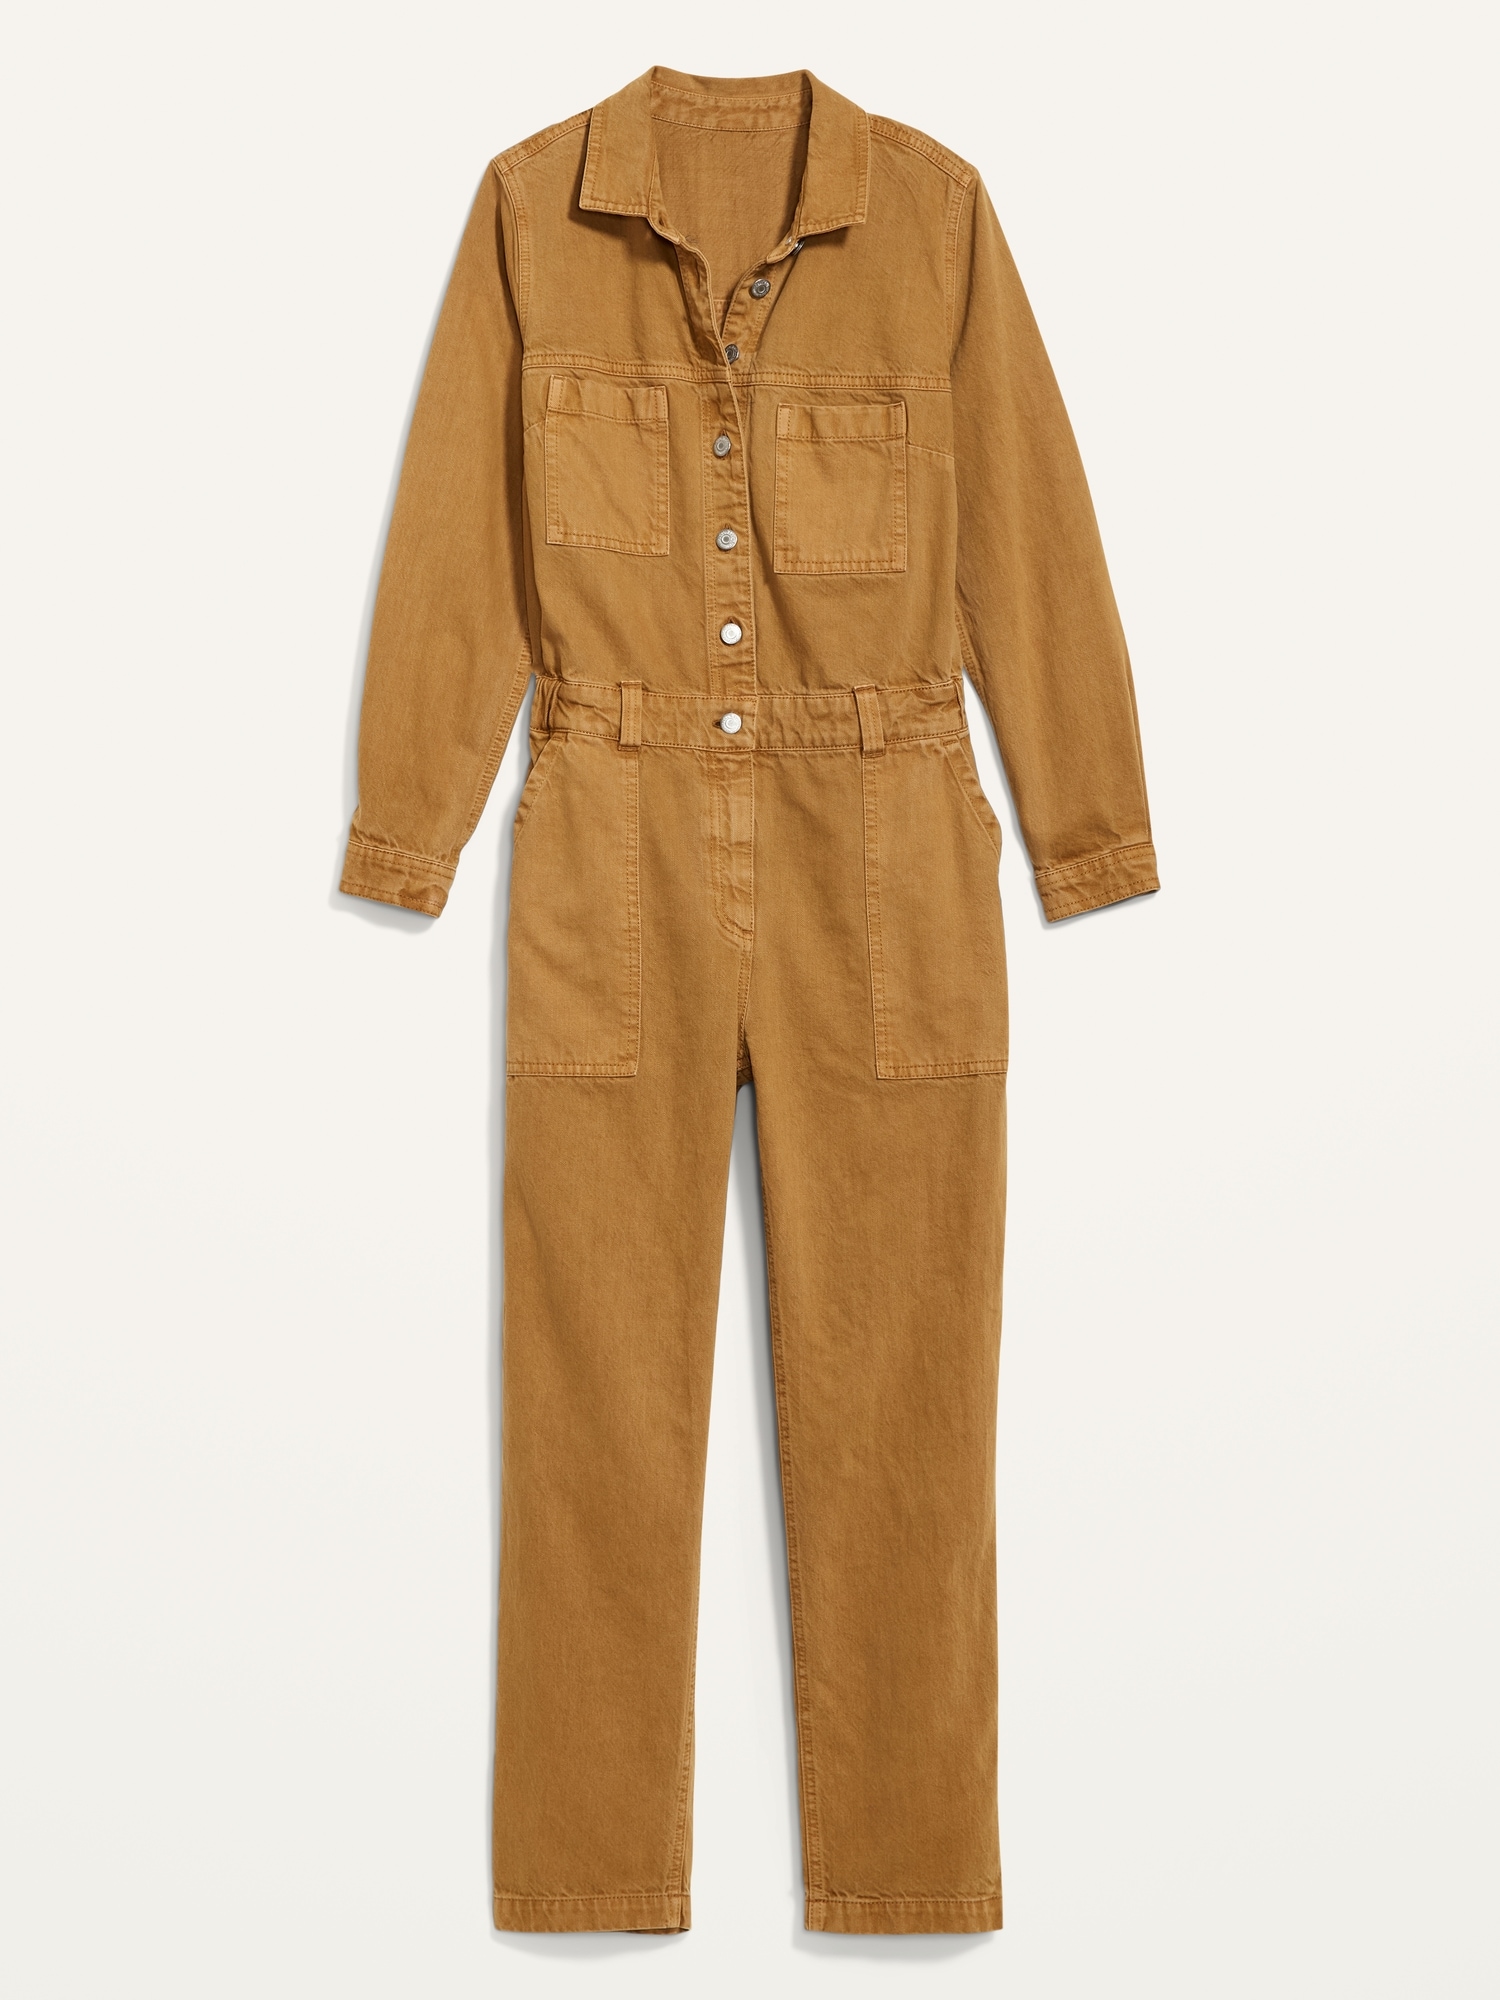 Everlane The Modern Utility Jumpsuit Review 2020 | vlr.eng.br